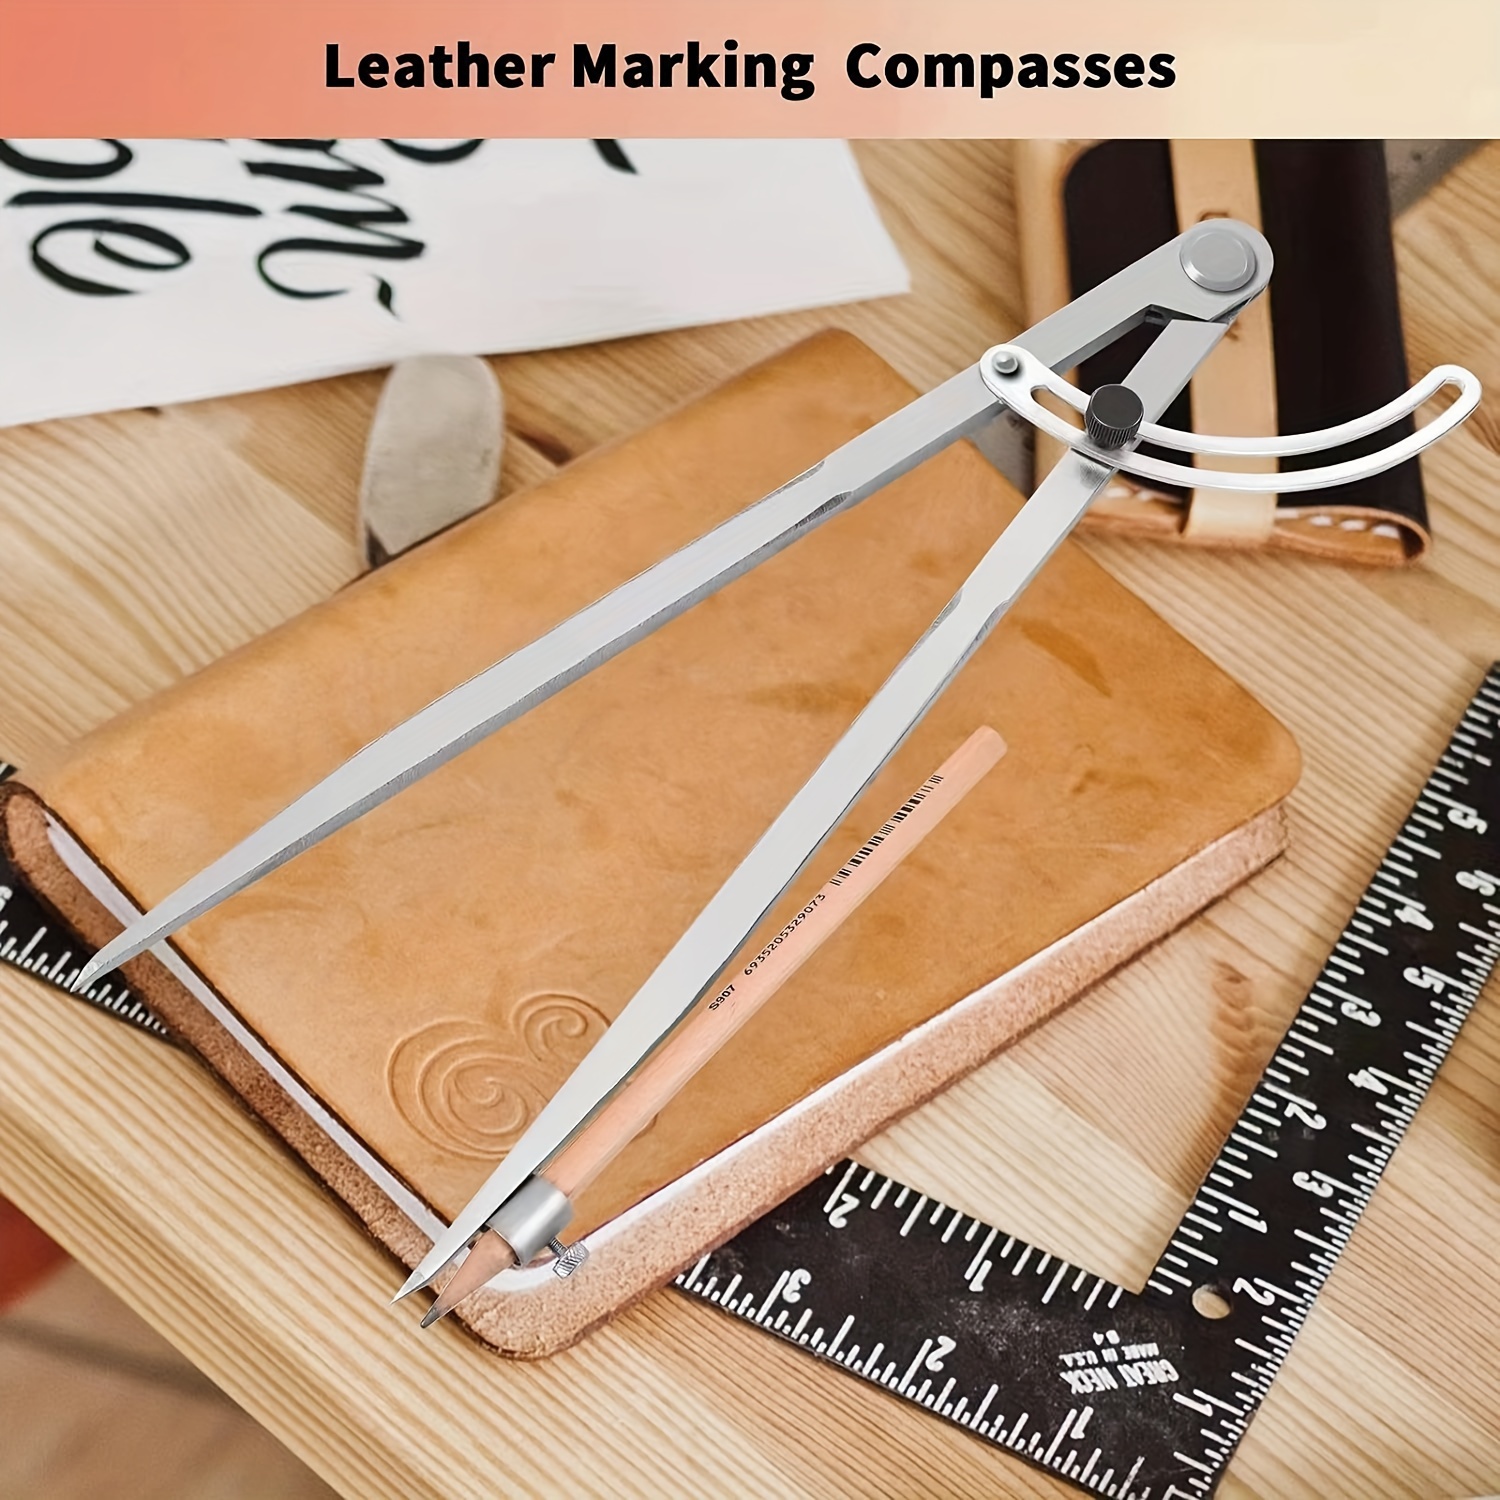 

12 Inch Compass With Wing, 8 Inch Compass With Wing, Compass For Geometry, Compass Drawing Tool, Woodworking Compass, Pencil Compass For Carpenter, Drafting, Drawing Compass